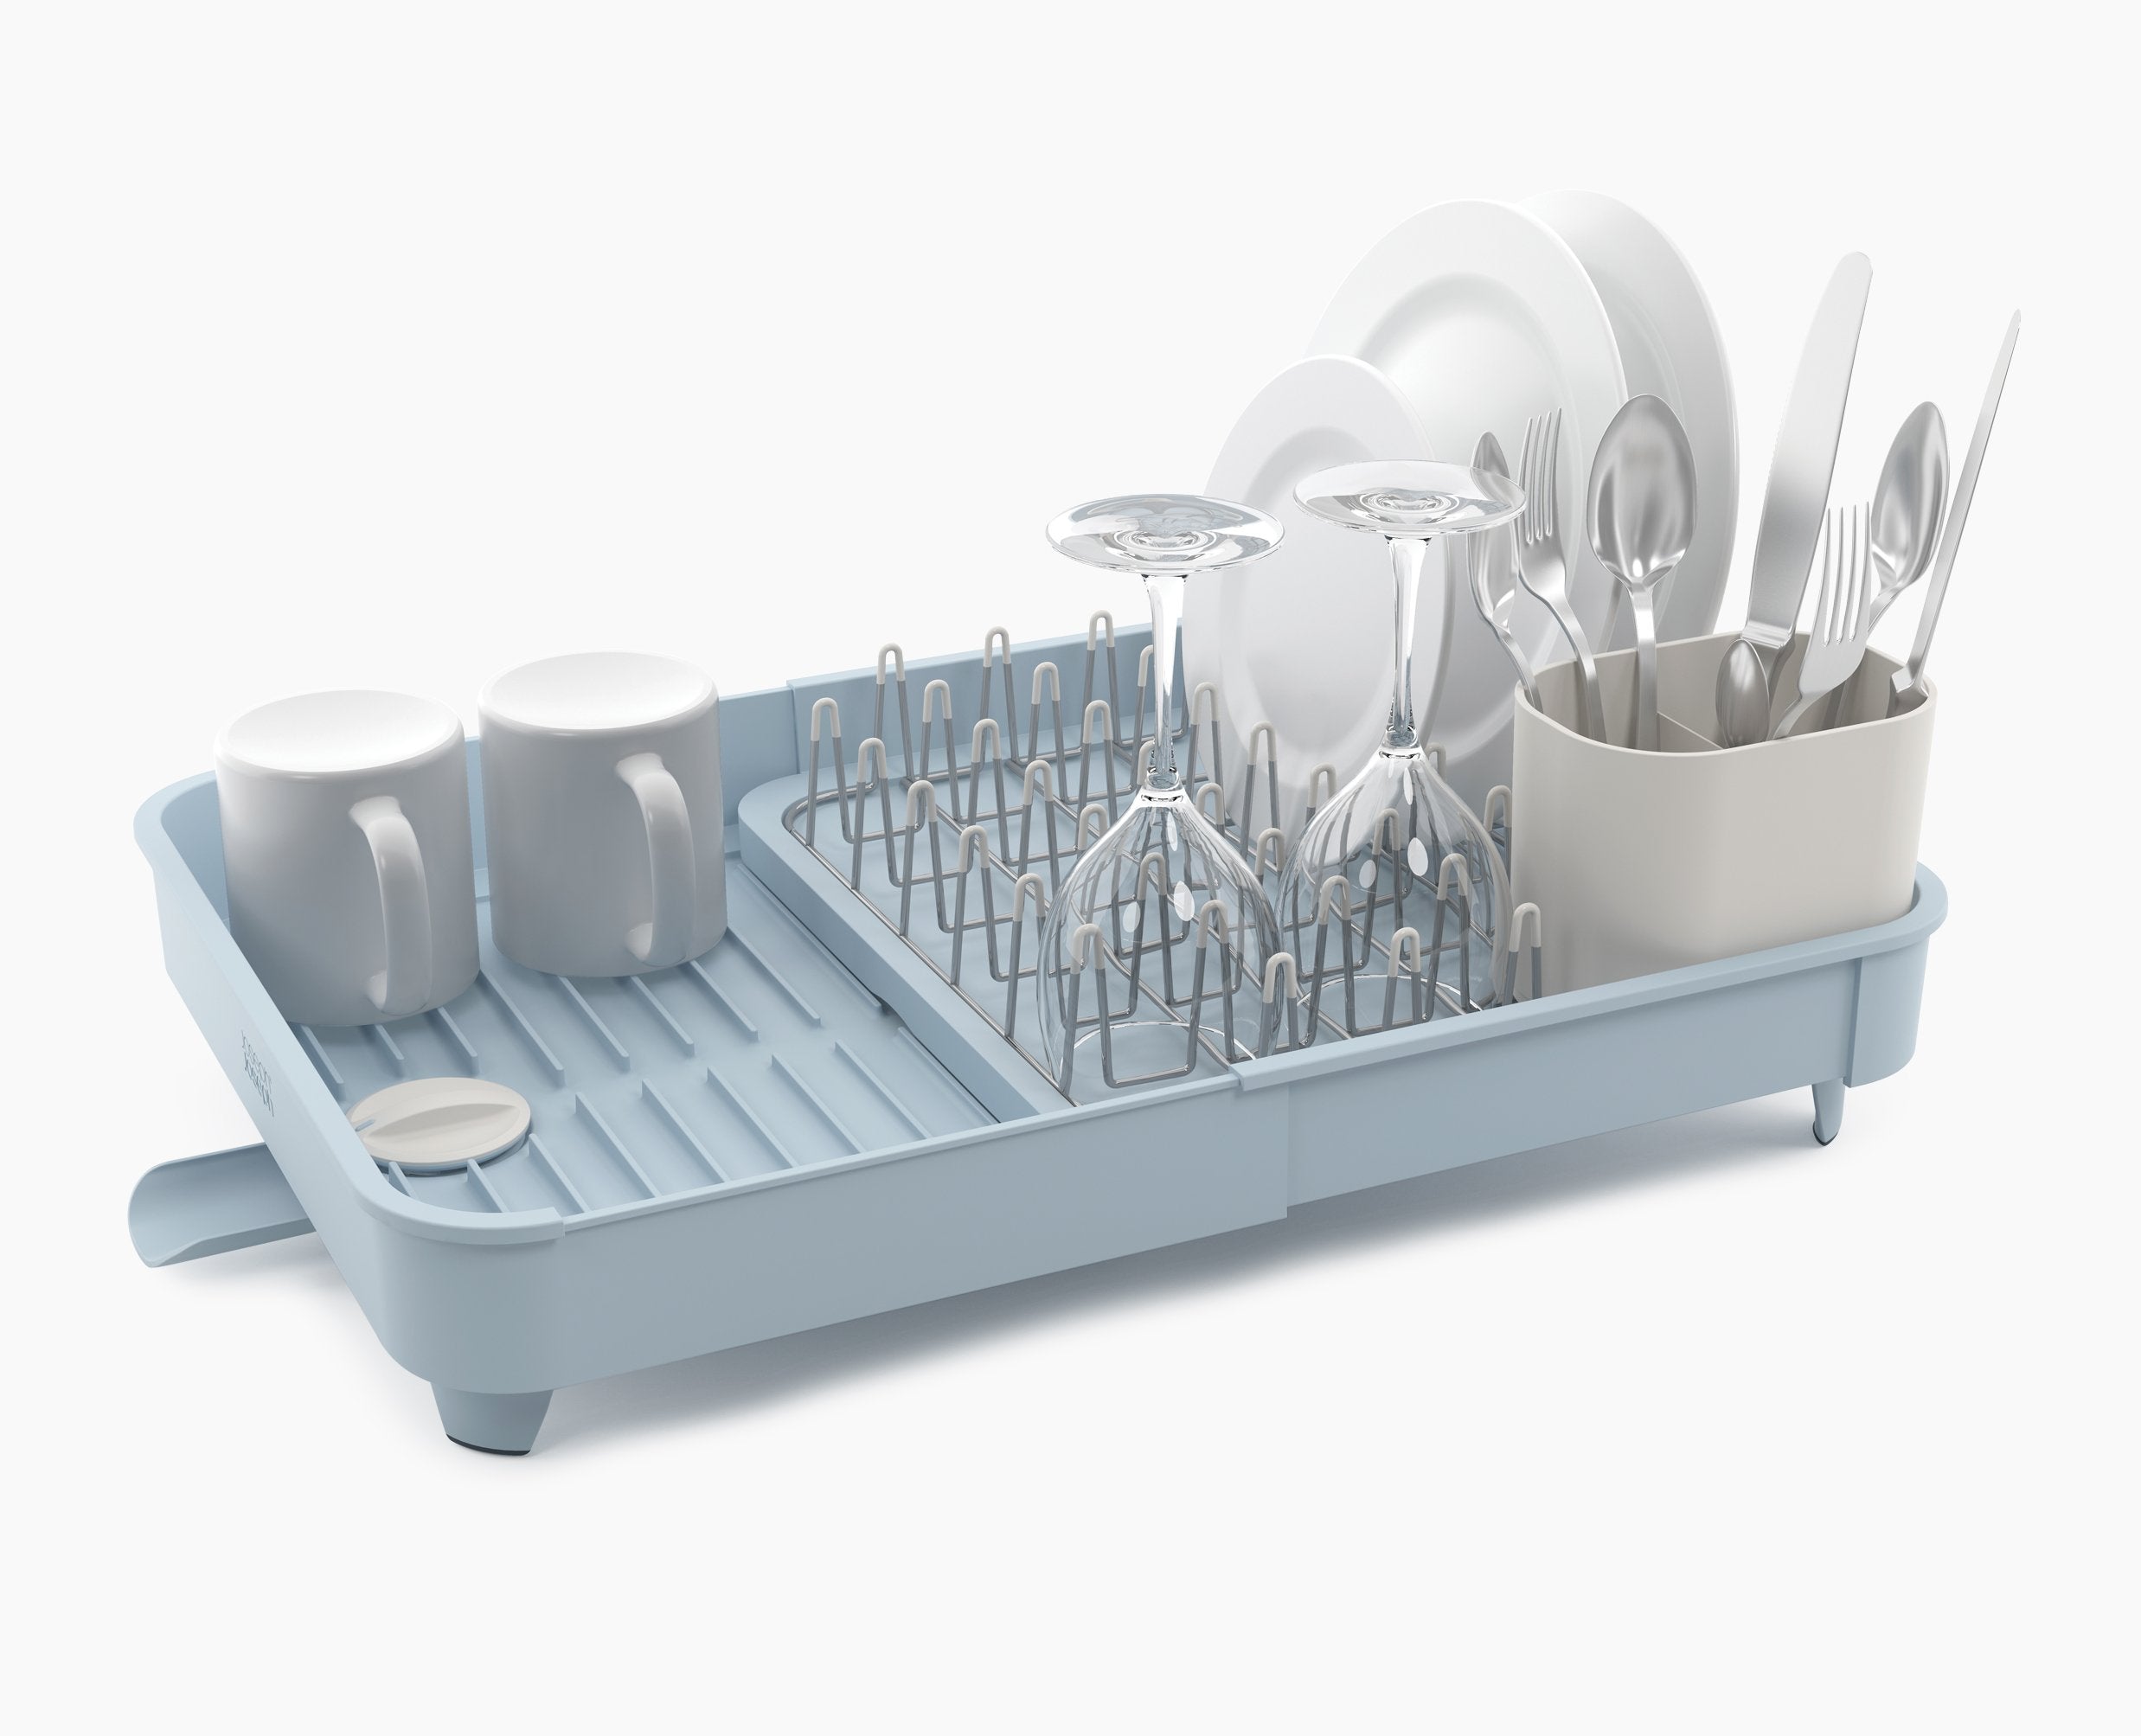 BEON.COM.AU  This versatile dish rack allows you to quickly and easily expand your dish drying space to almost twice its size when needed.  Extends to almost twice its size to hold more items when needed Integrated plug can be set to trap water for draining later Raised ribs prevent water being trapped under... Joseph Joseph at BEON.COM.AU